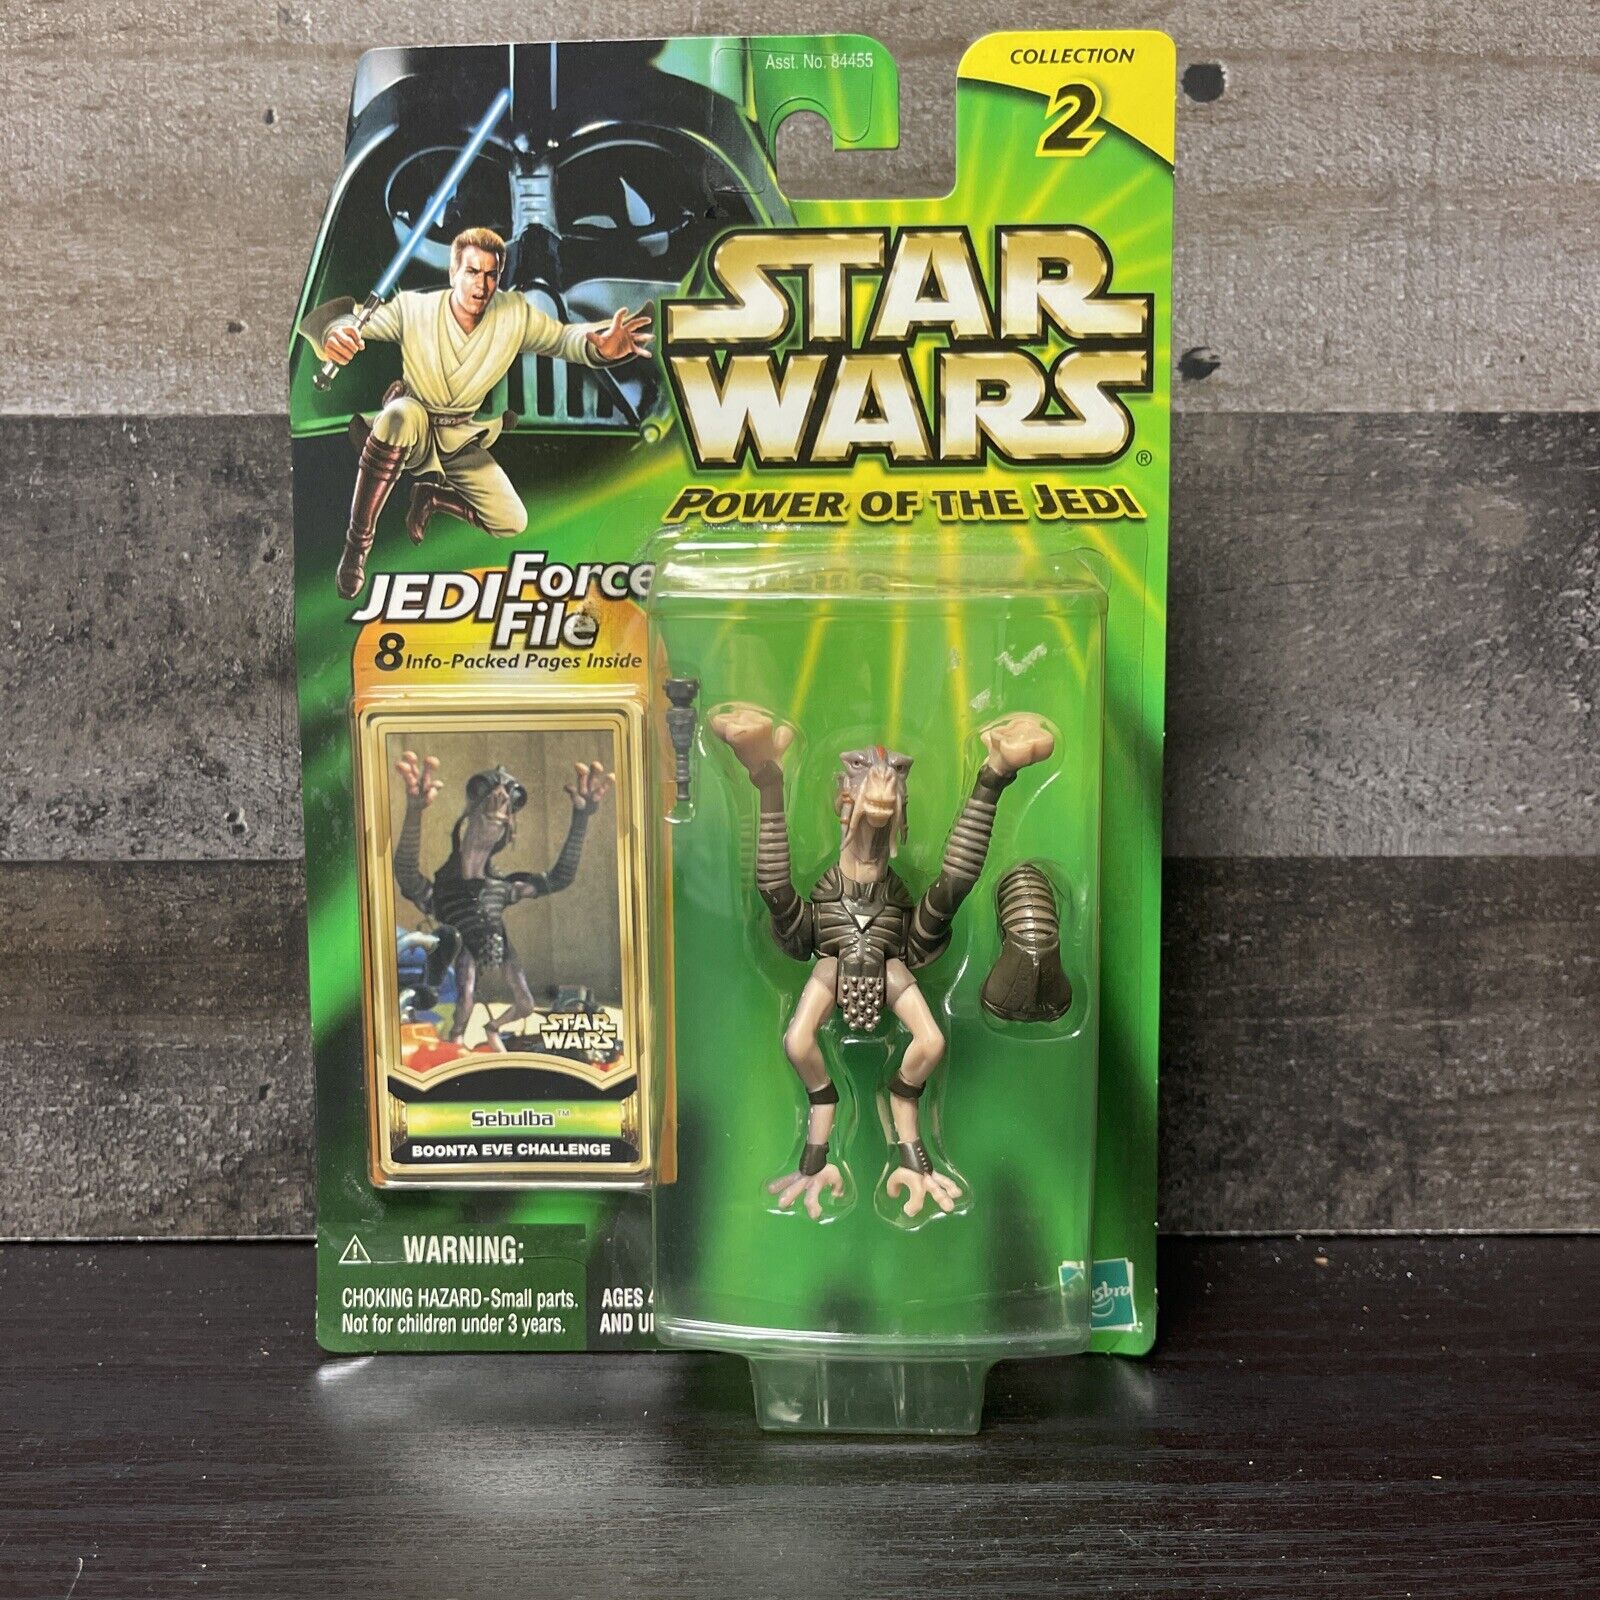 Star Wars Power Of The Jedi Sebulba Boonta Eve Challenge NEW IN PACKAGE 